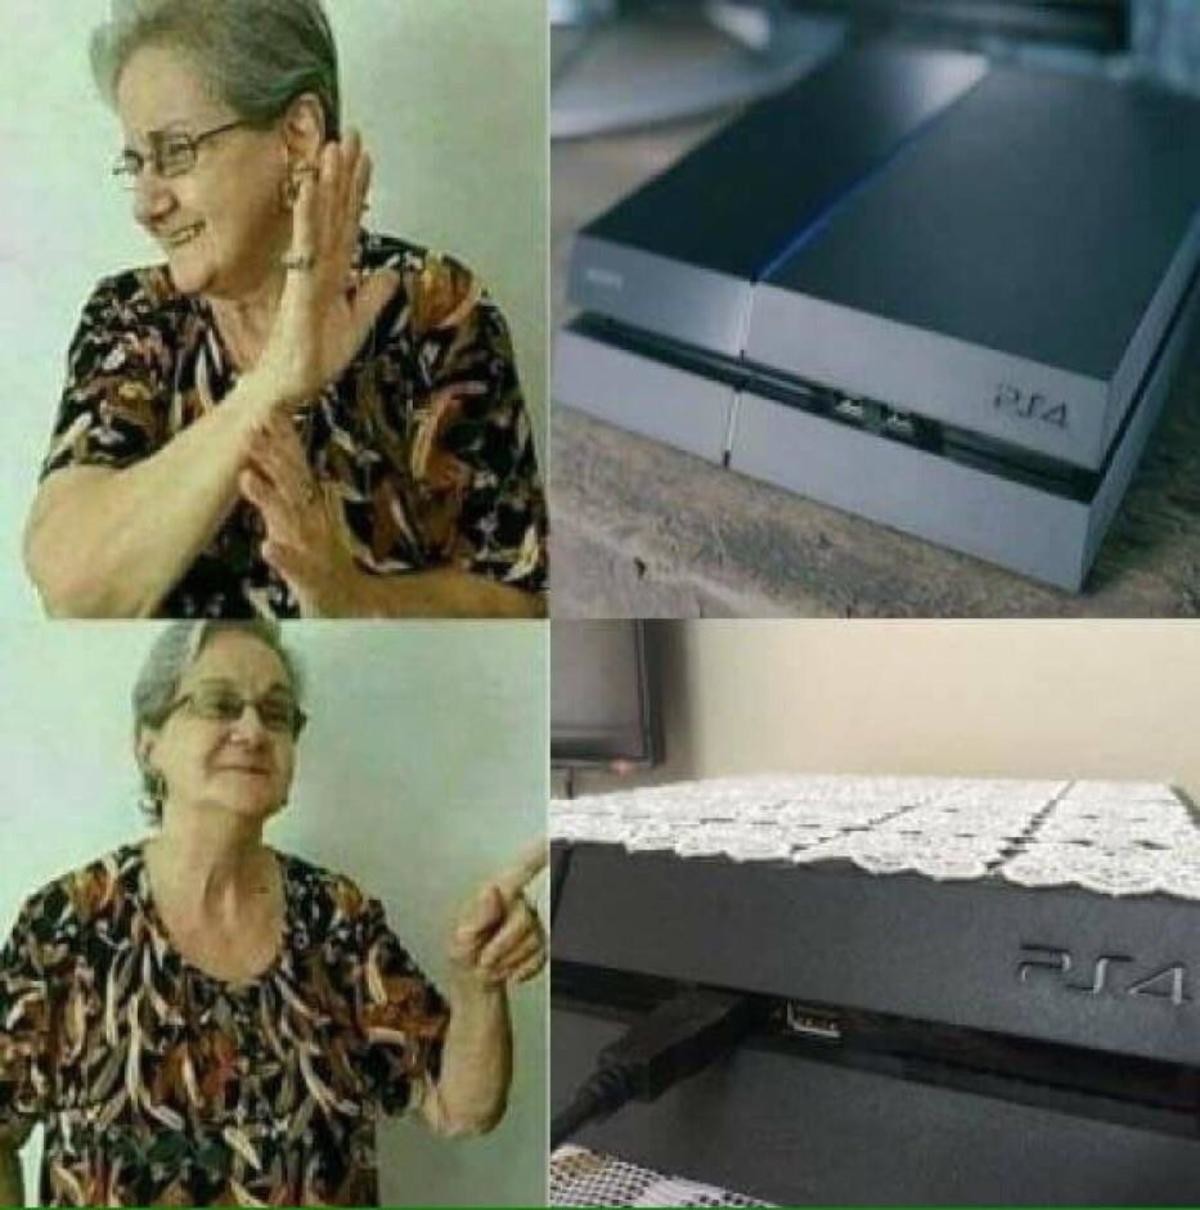 Grandma knows you have dirty